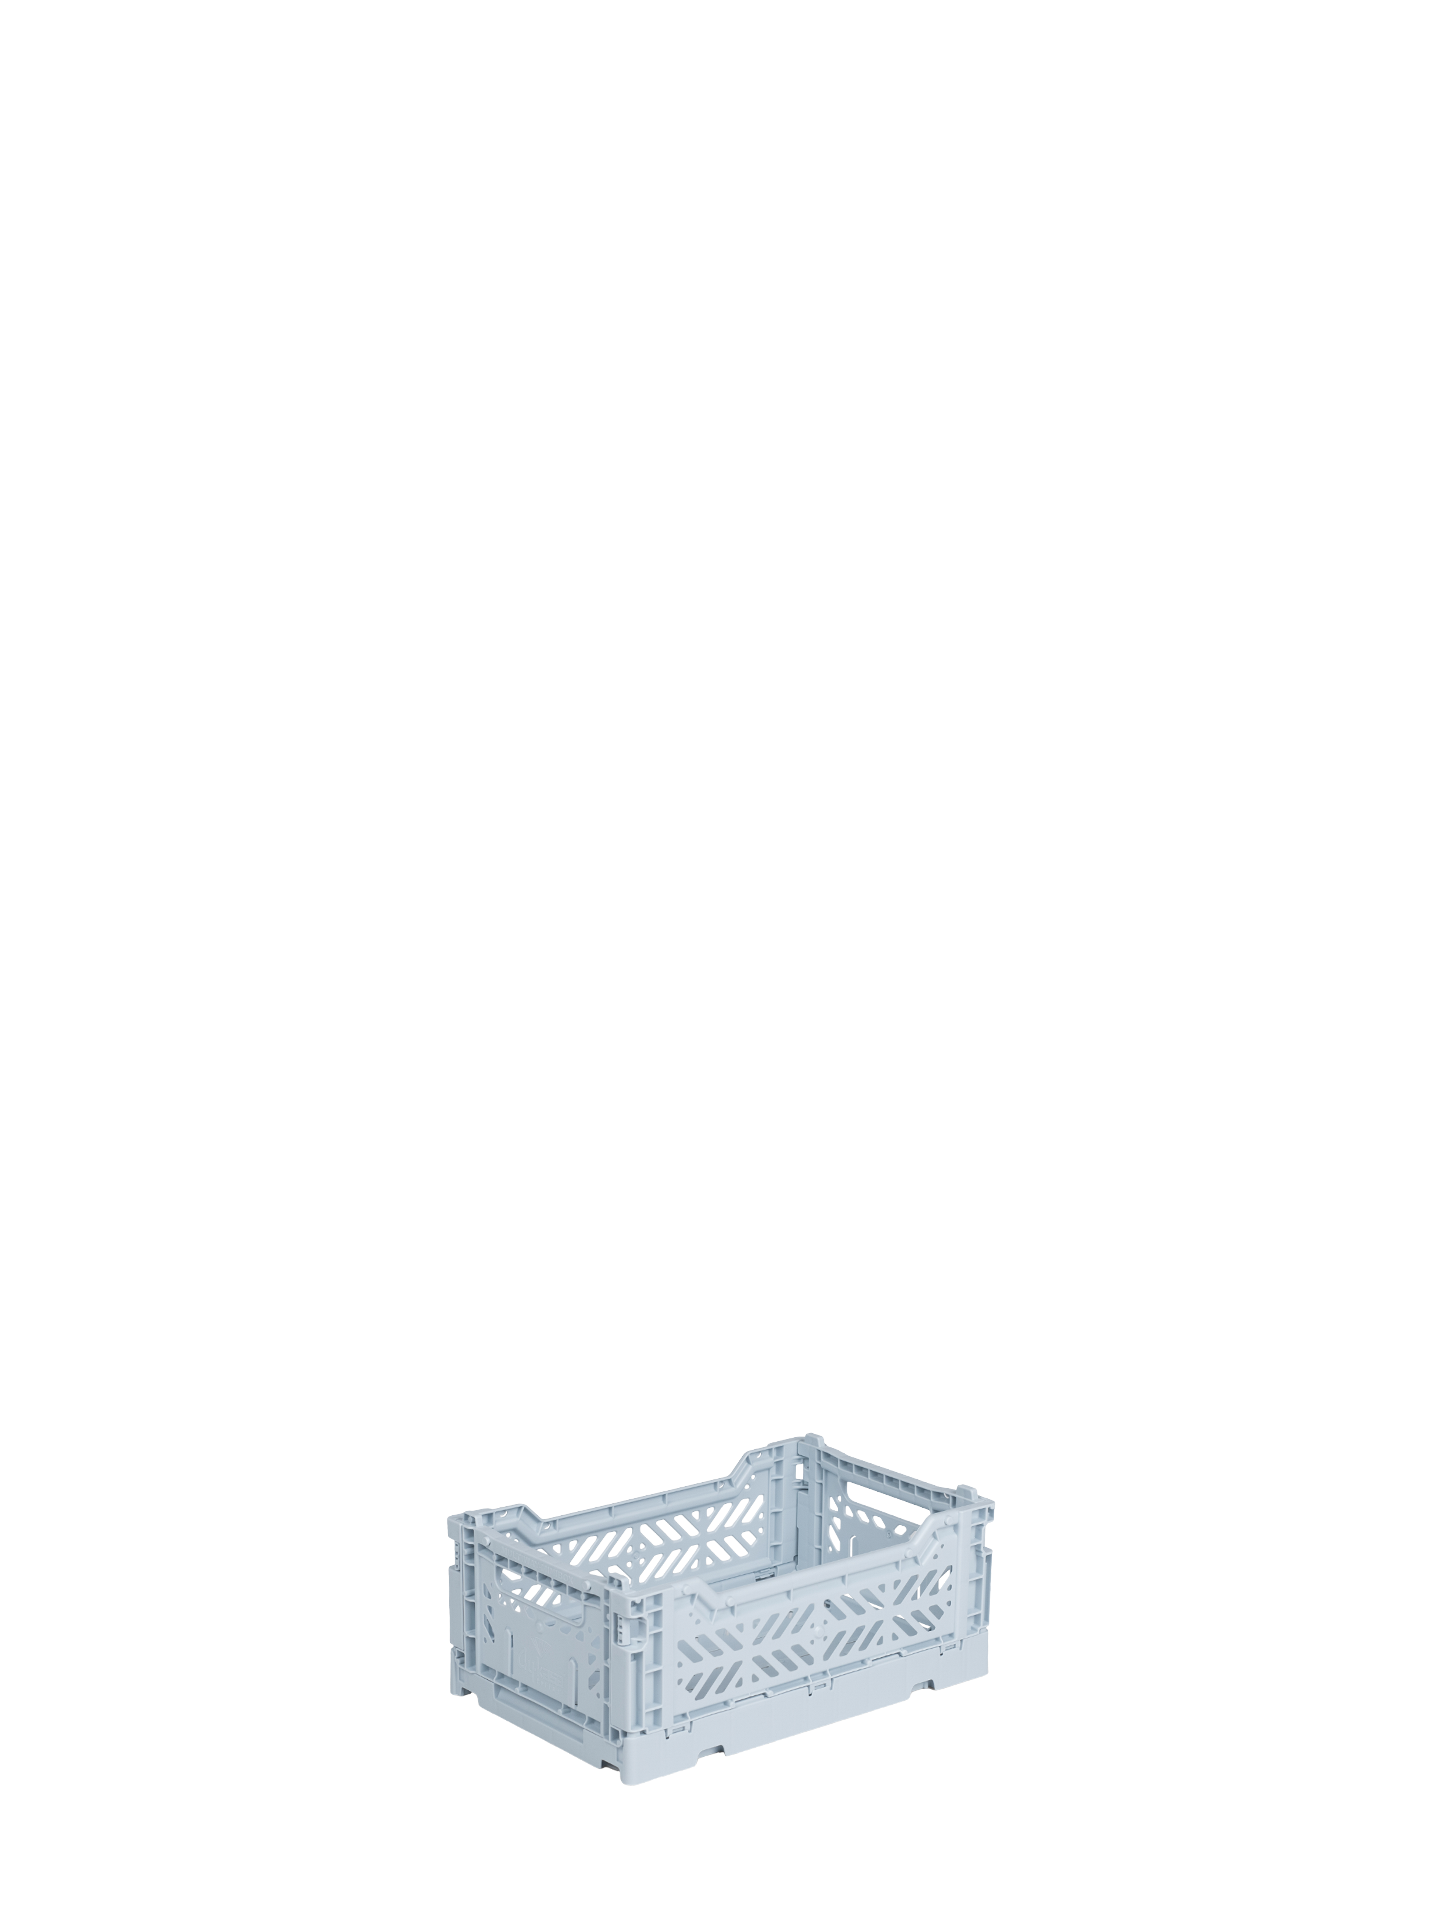 Mini Aykasa crate in pale blue stacks and folds